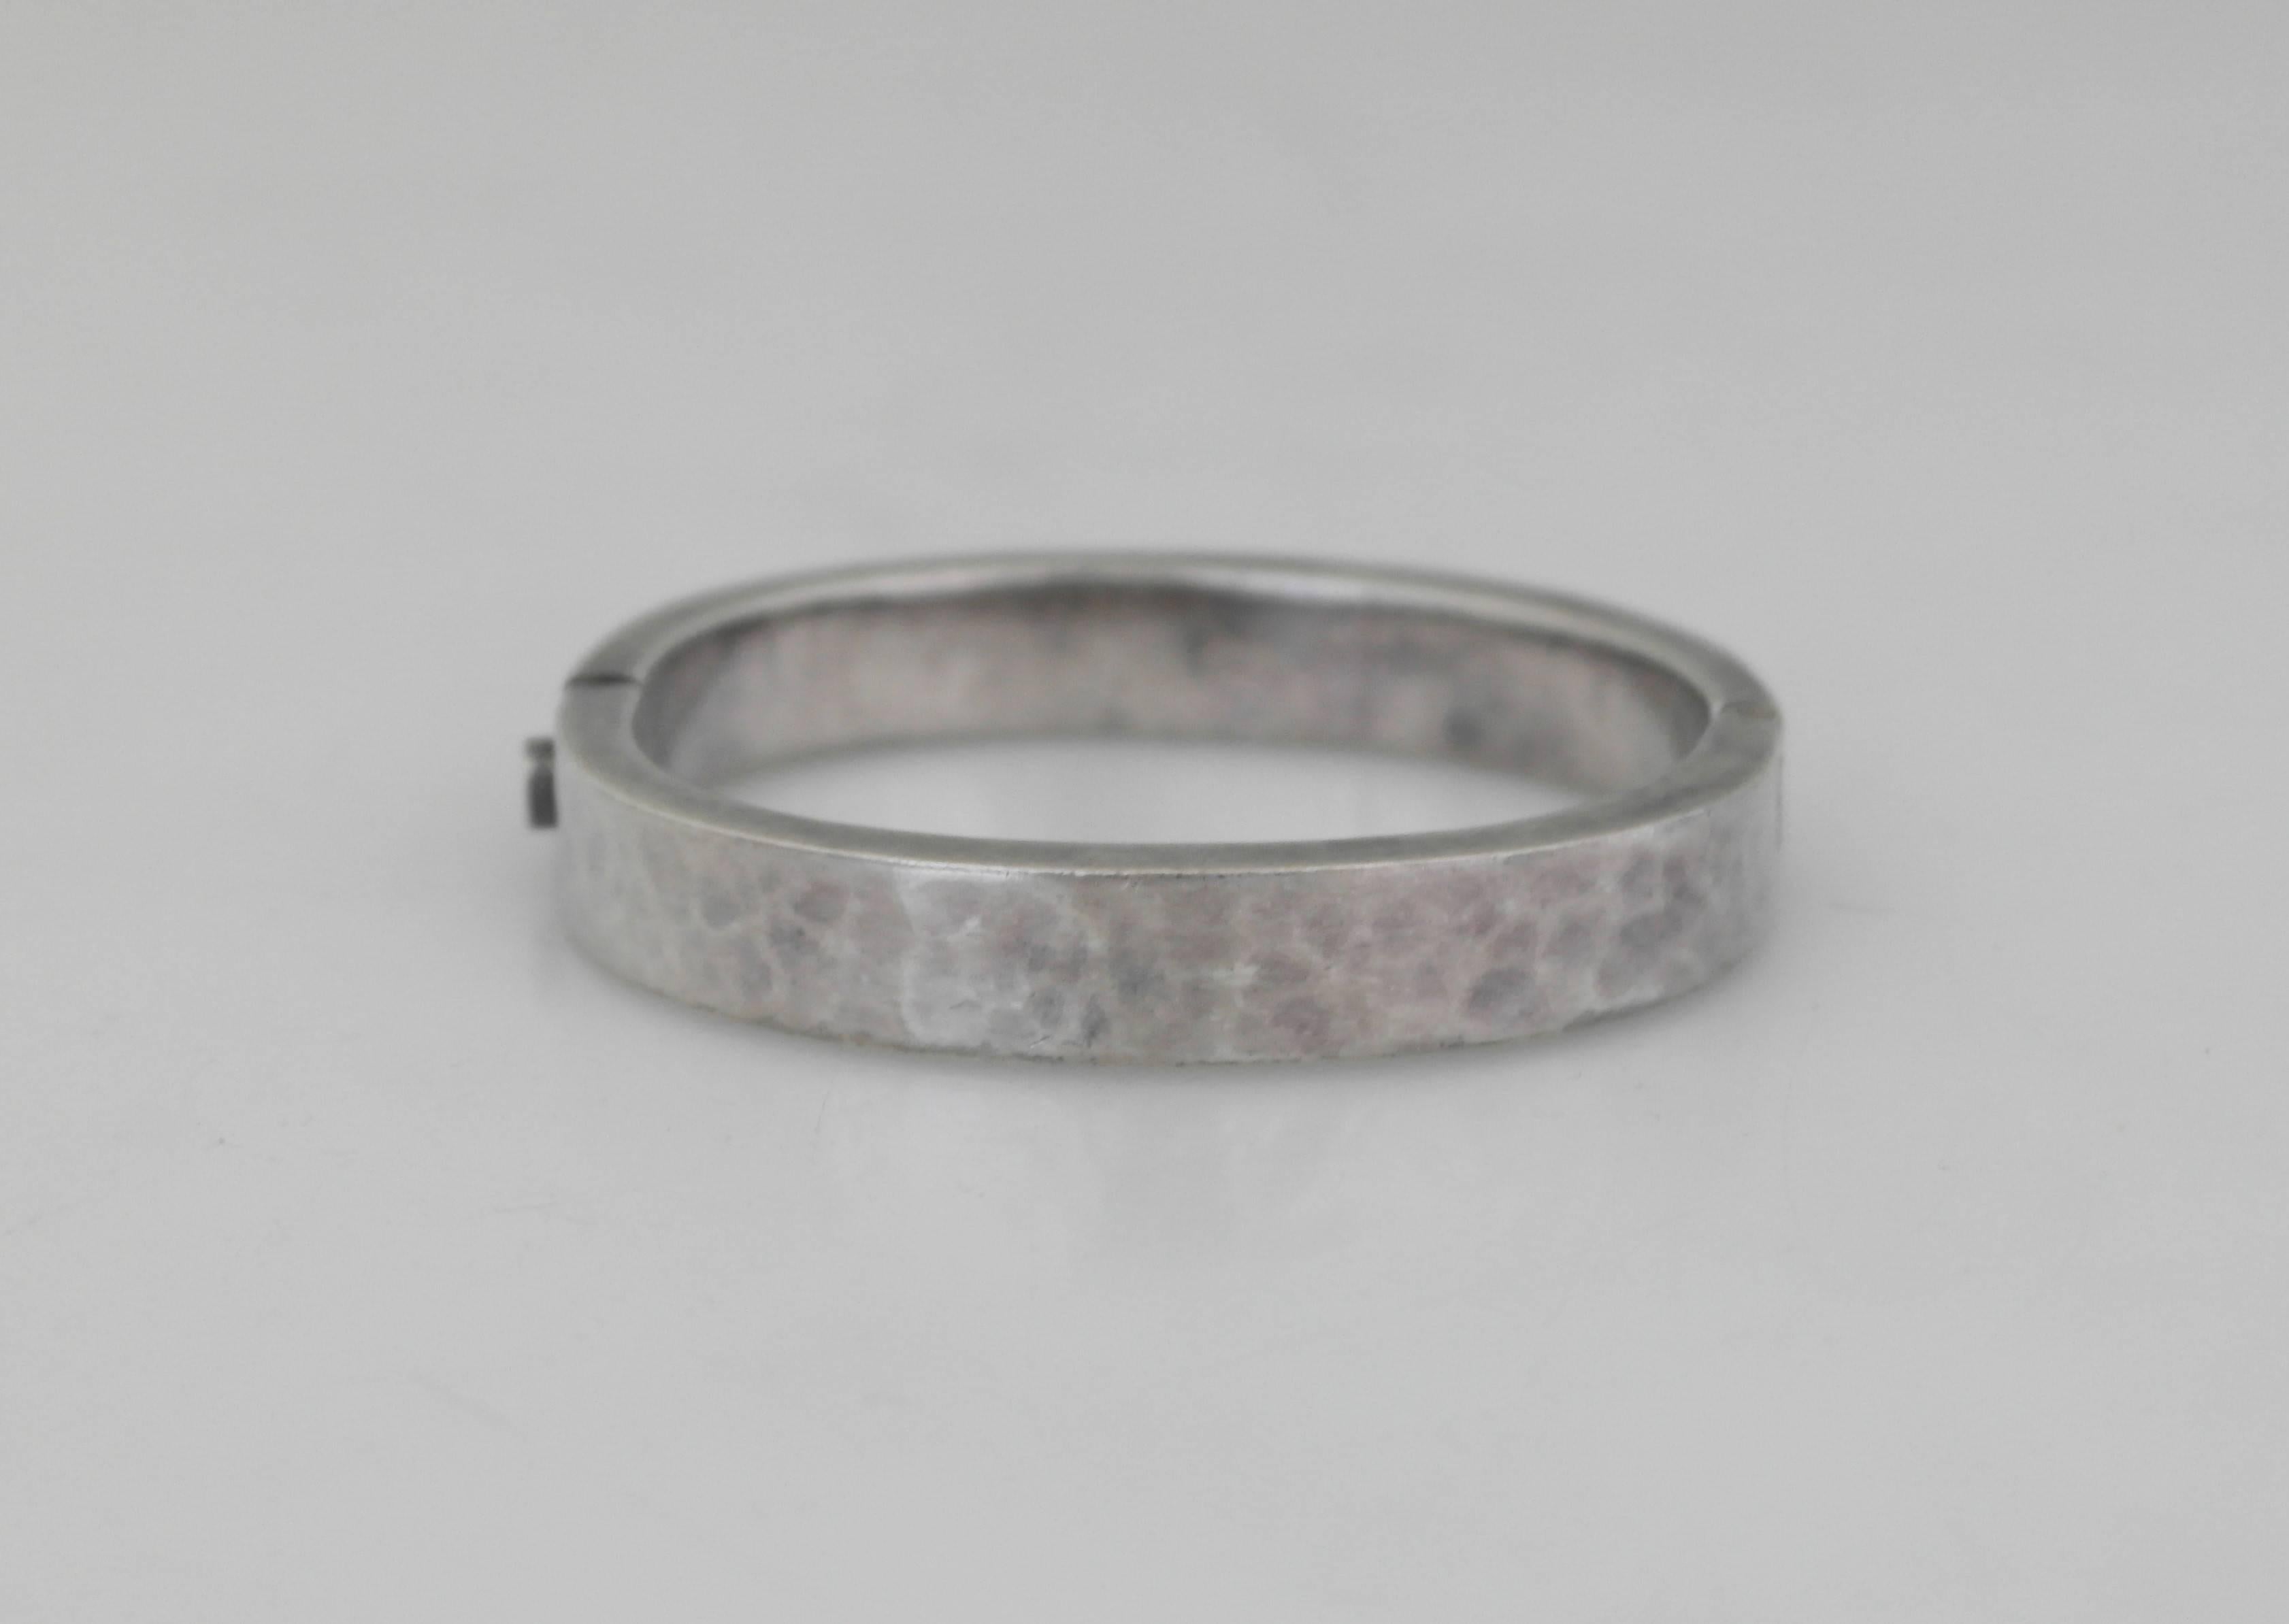 Being offered is a sterling silver bracelet by Paz of Taxco, Mexico. Bangle hinged bracelet has a lightly hammered surface. Dimensions: 1/2 inch wide x 6 3/4 inches (wearable). Marked as illustrated. In excellent condition.